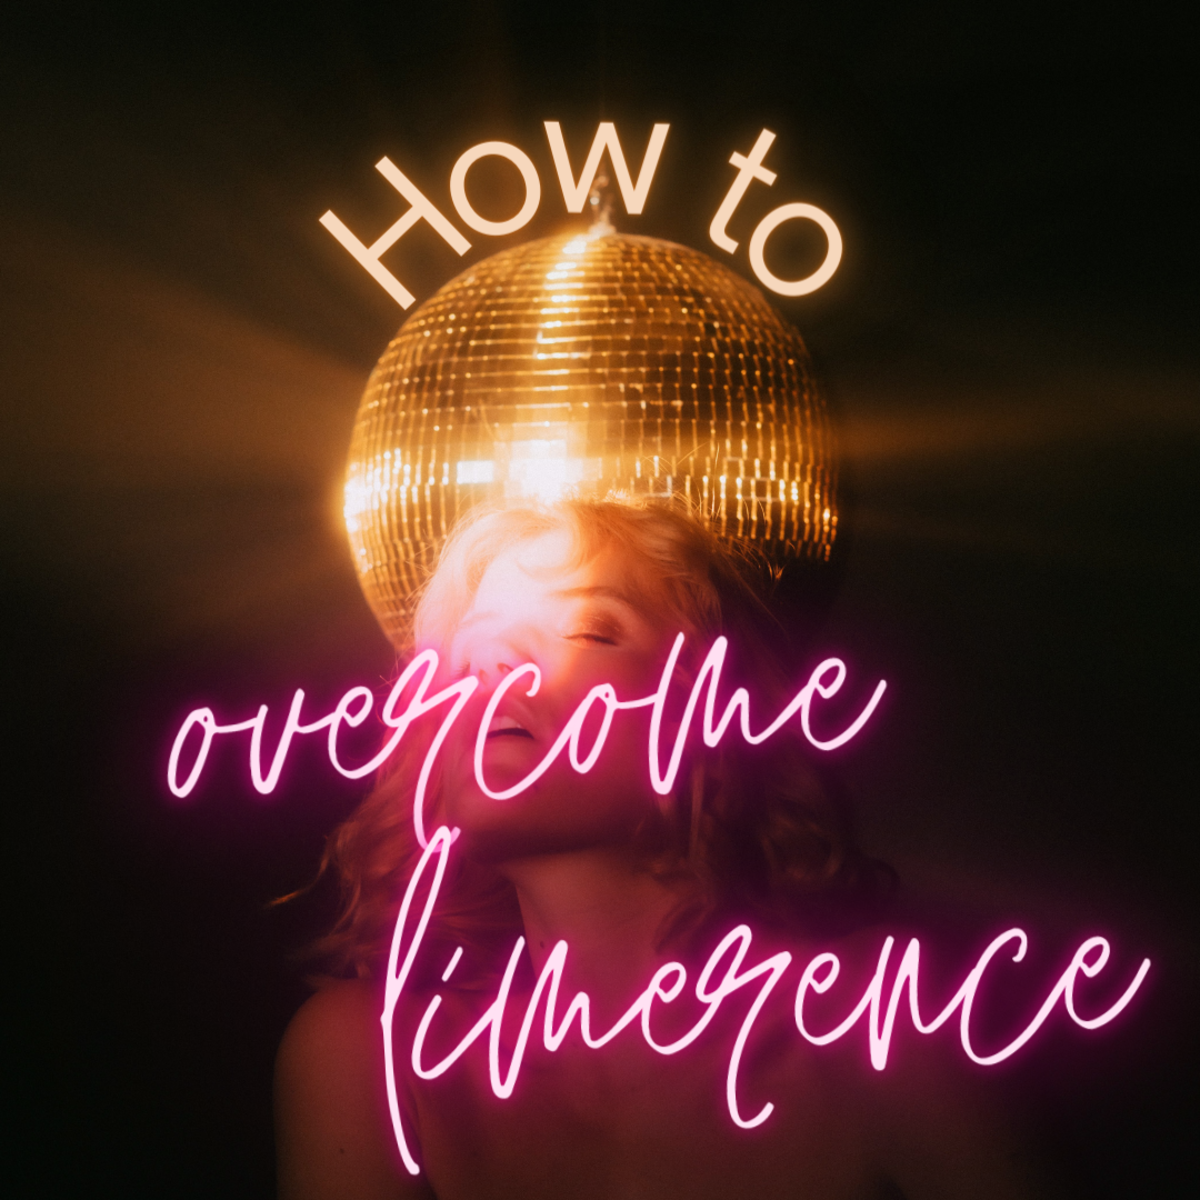 How to Overcome Limerence: The Psychology of Obsessive Love